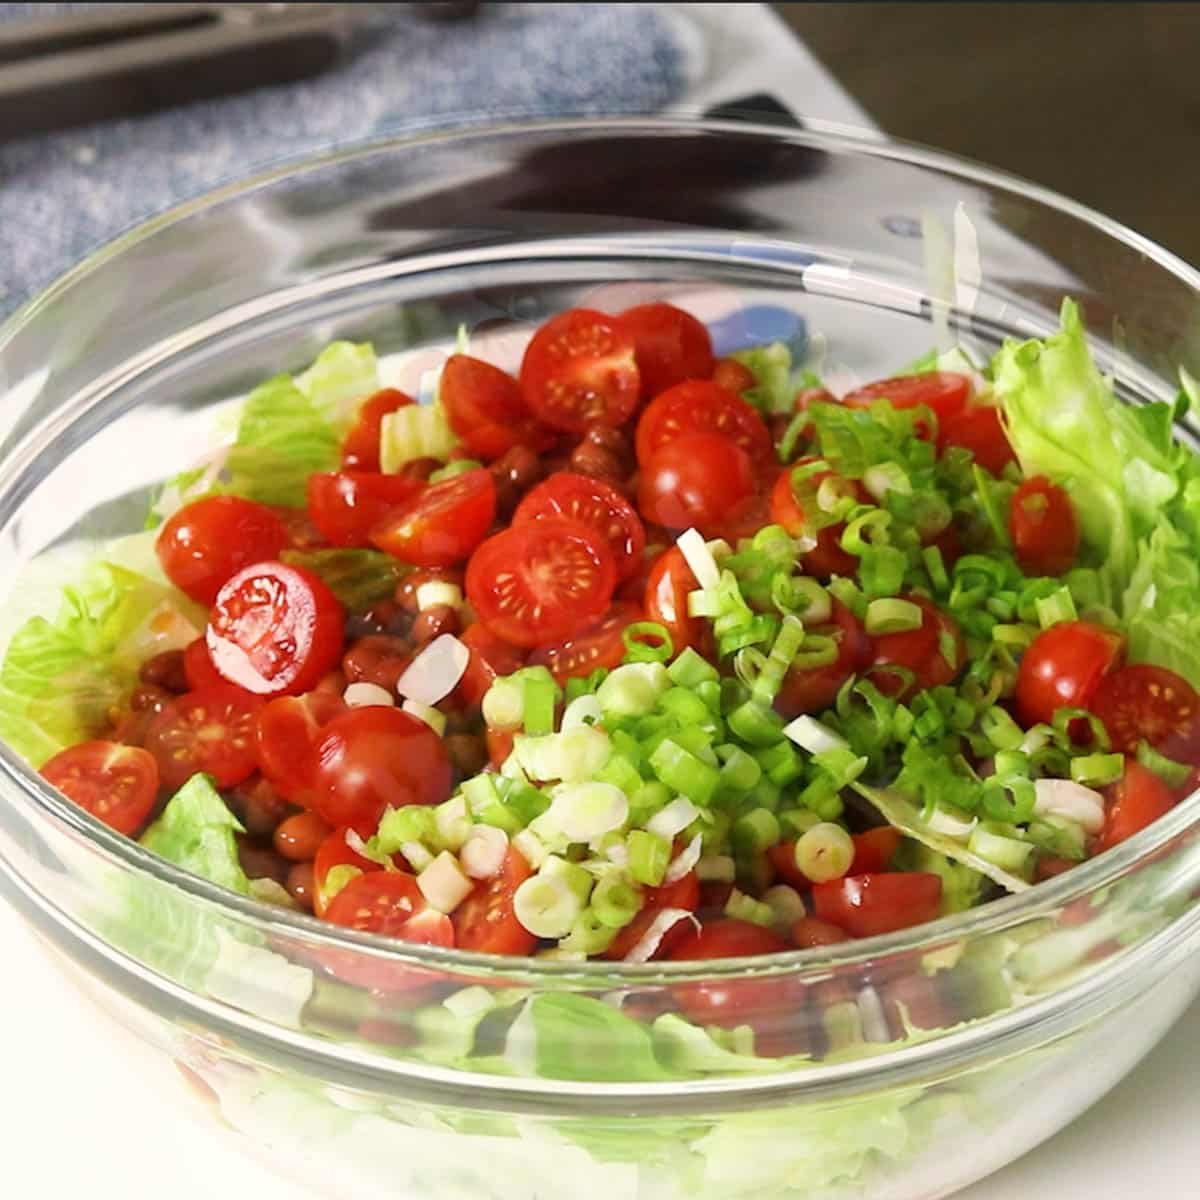 tomatoes and onions on top of lettuce and chili beans 